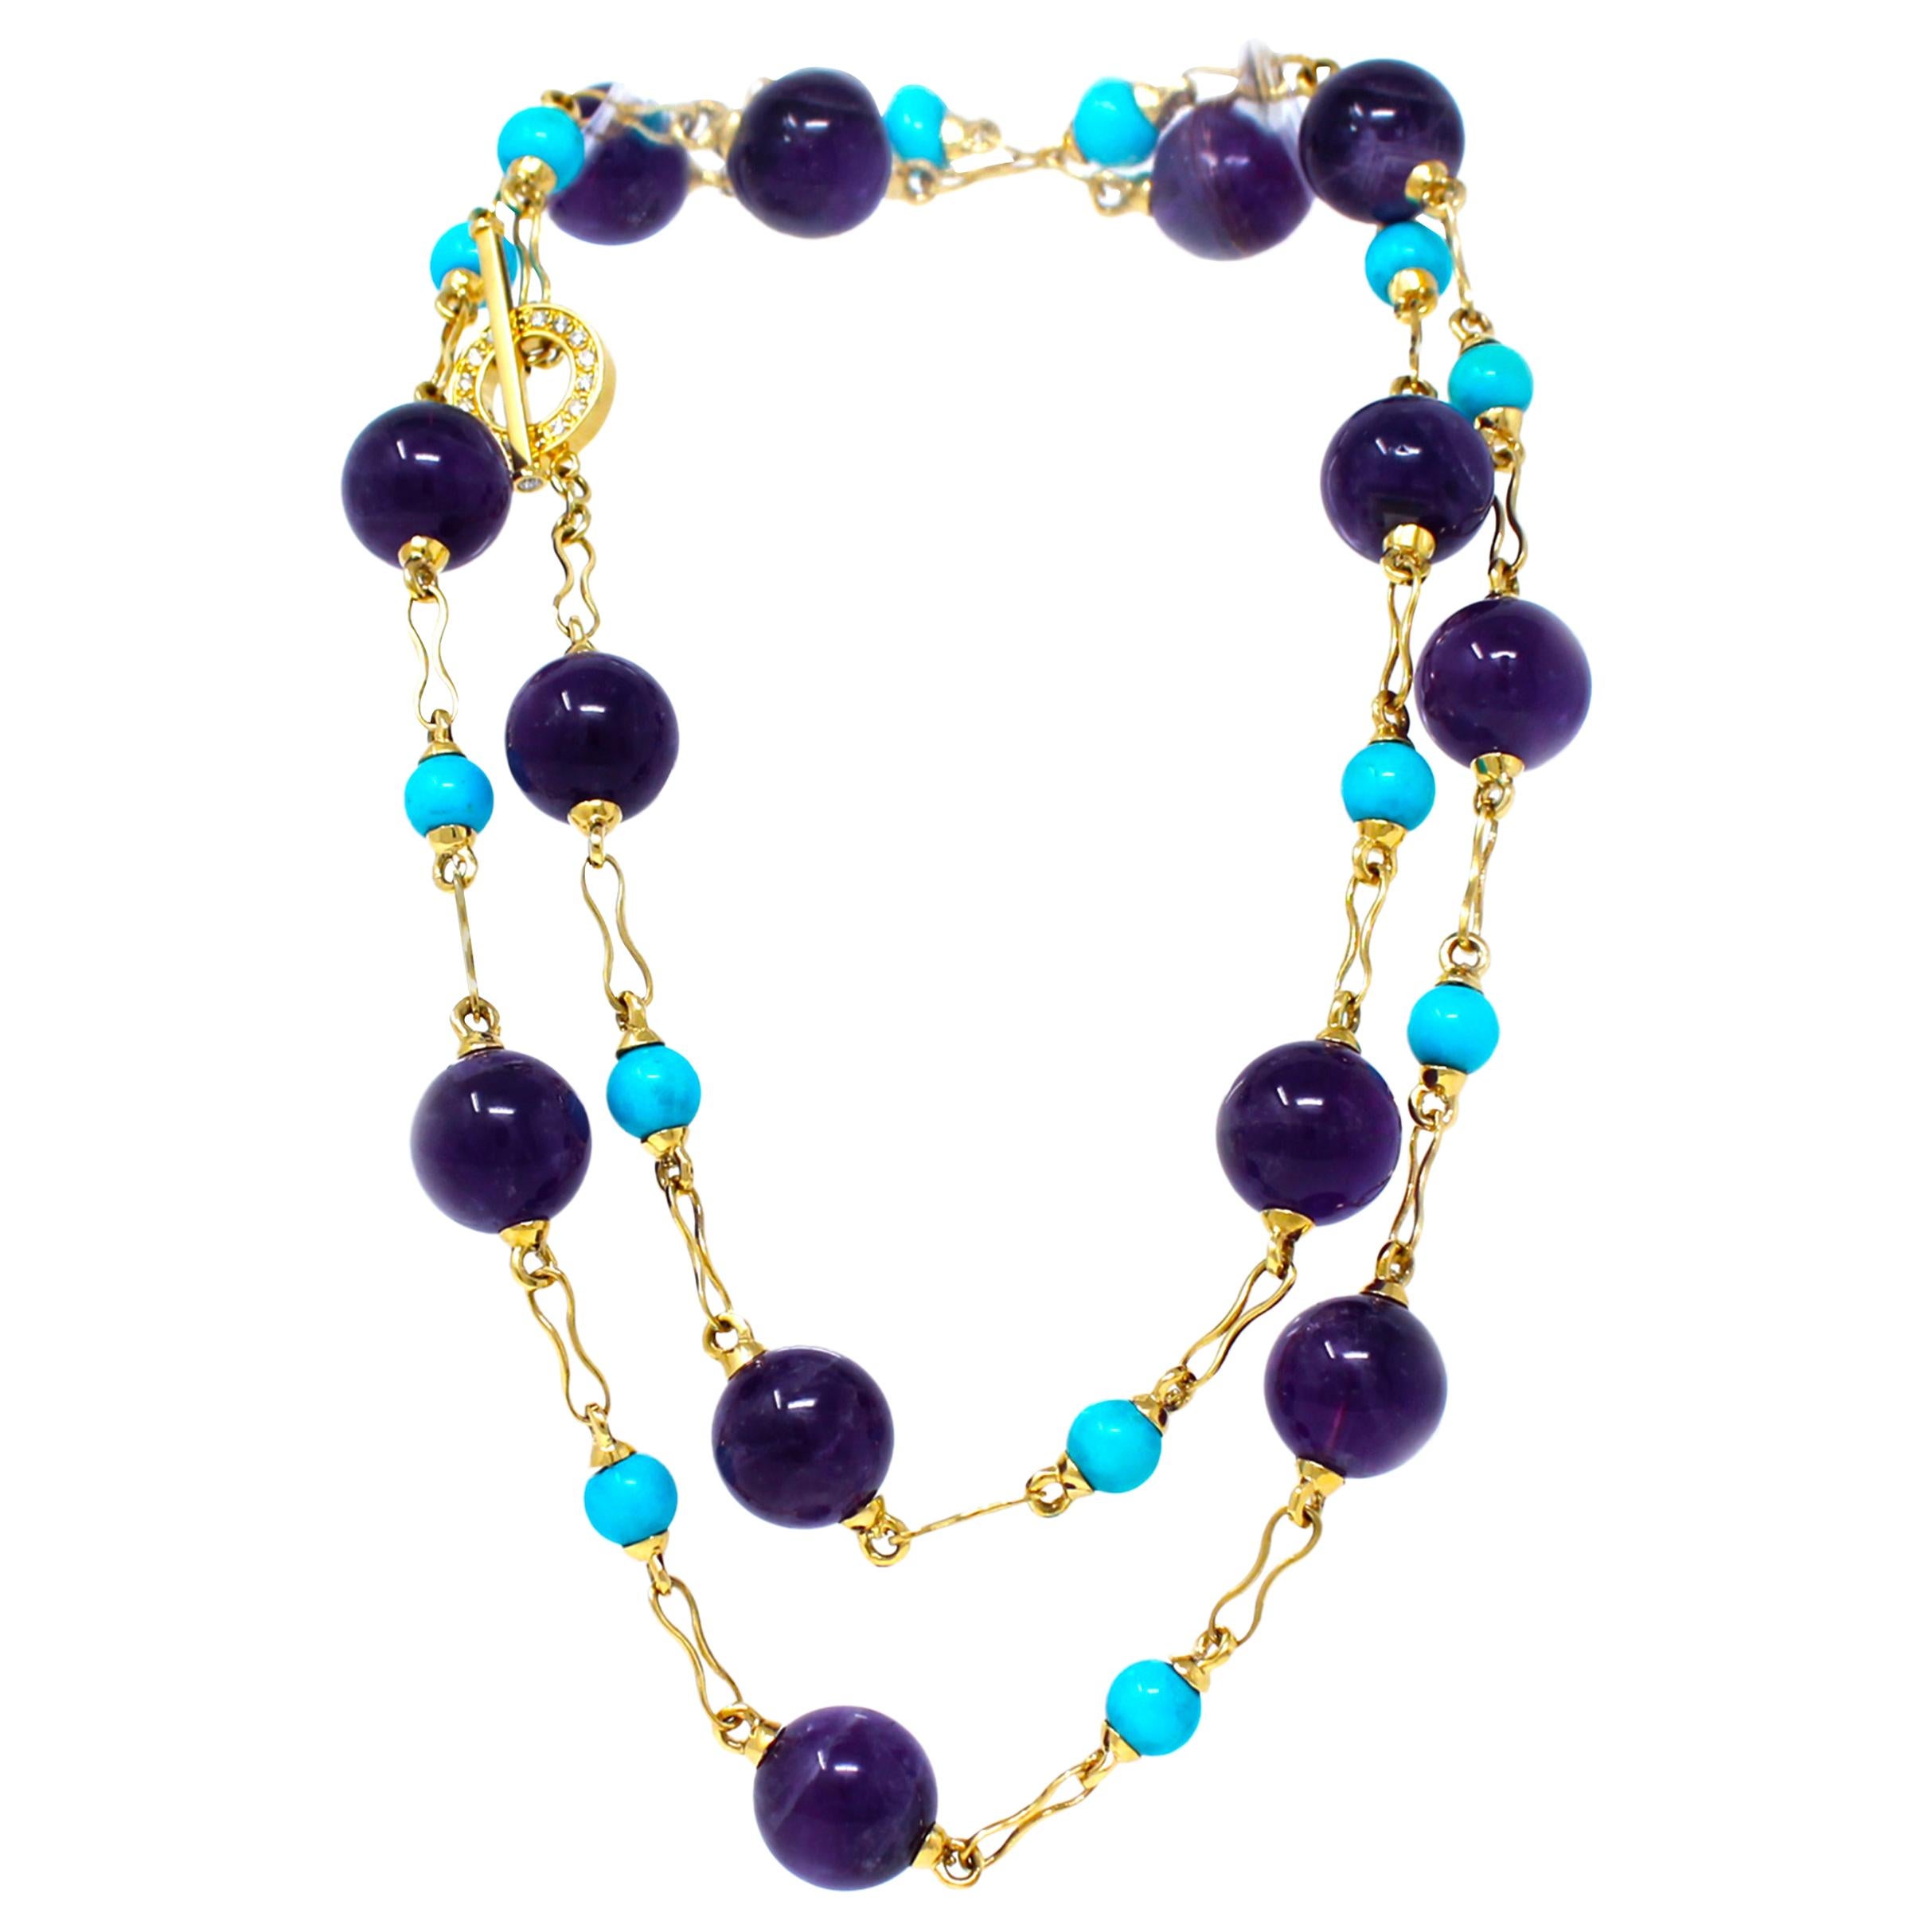 Rosaria Varra Turquoise and Amethyst Beads Station Necklace 18 Karat